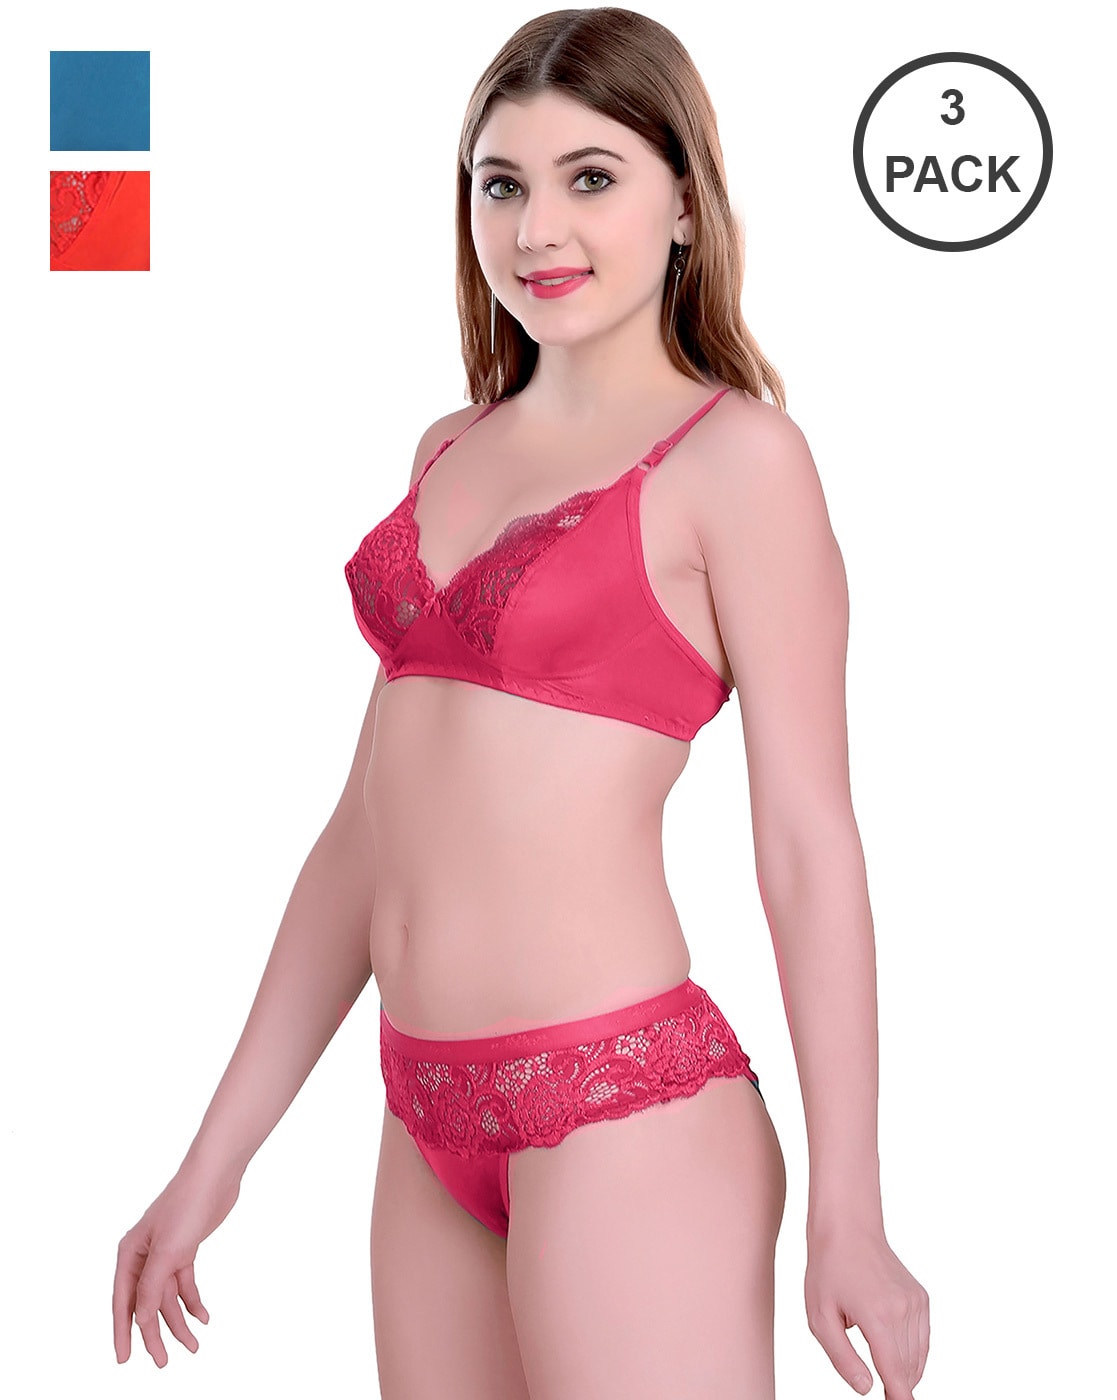 36B Size Bra Panty Sets: Buy 36B Size Bra Panty Sets for Women Online at  Low Prices - Snapdeal India